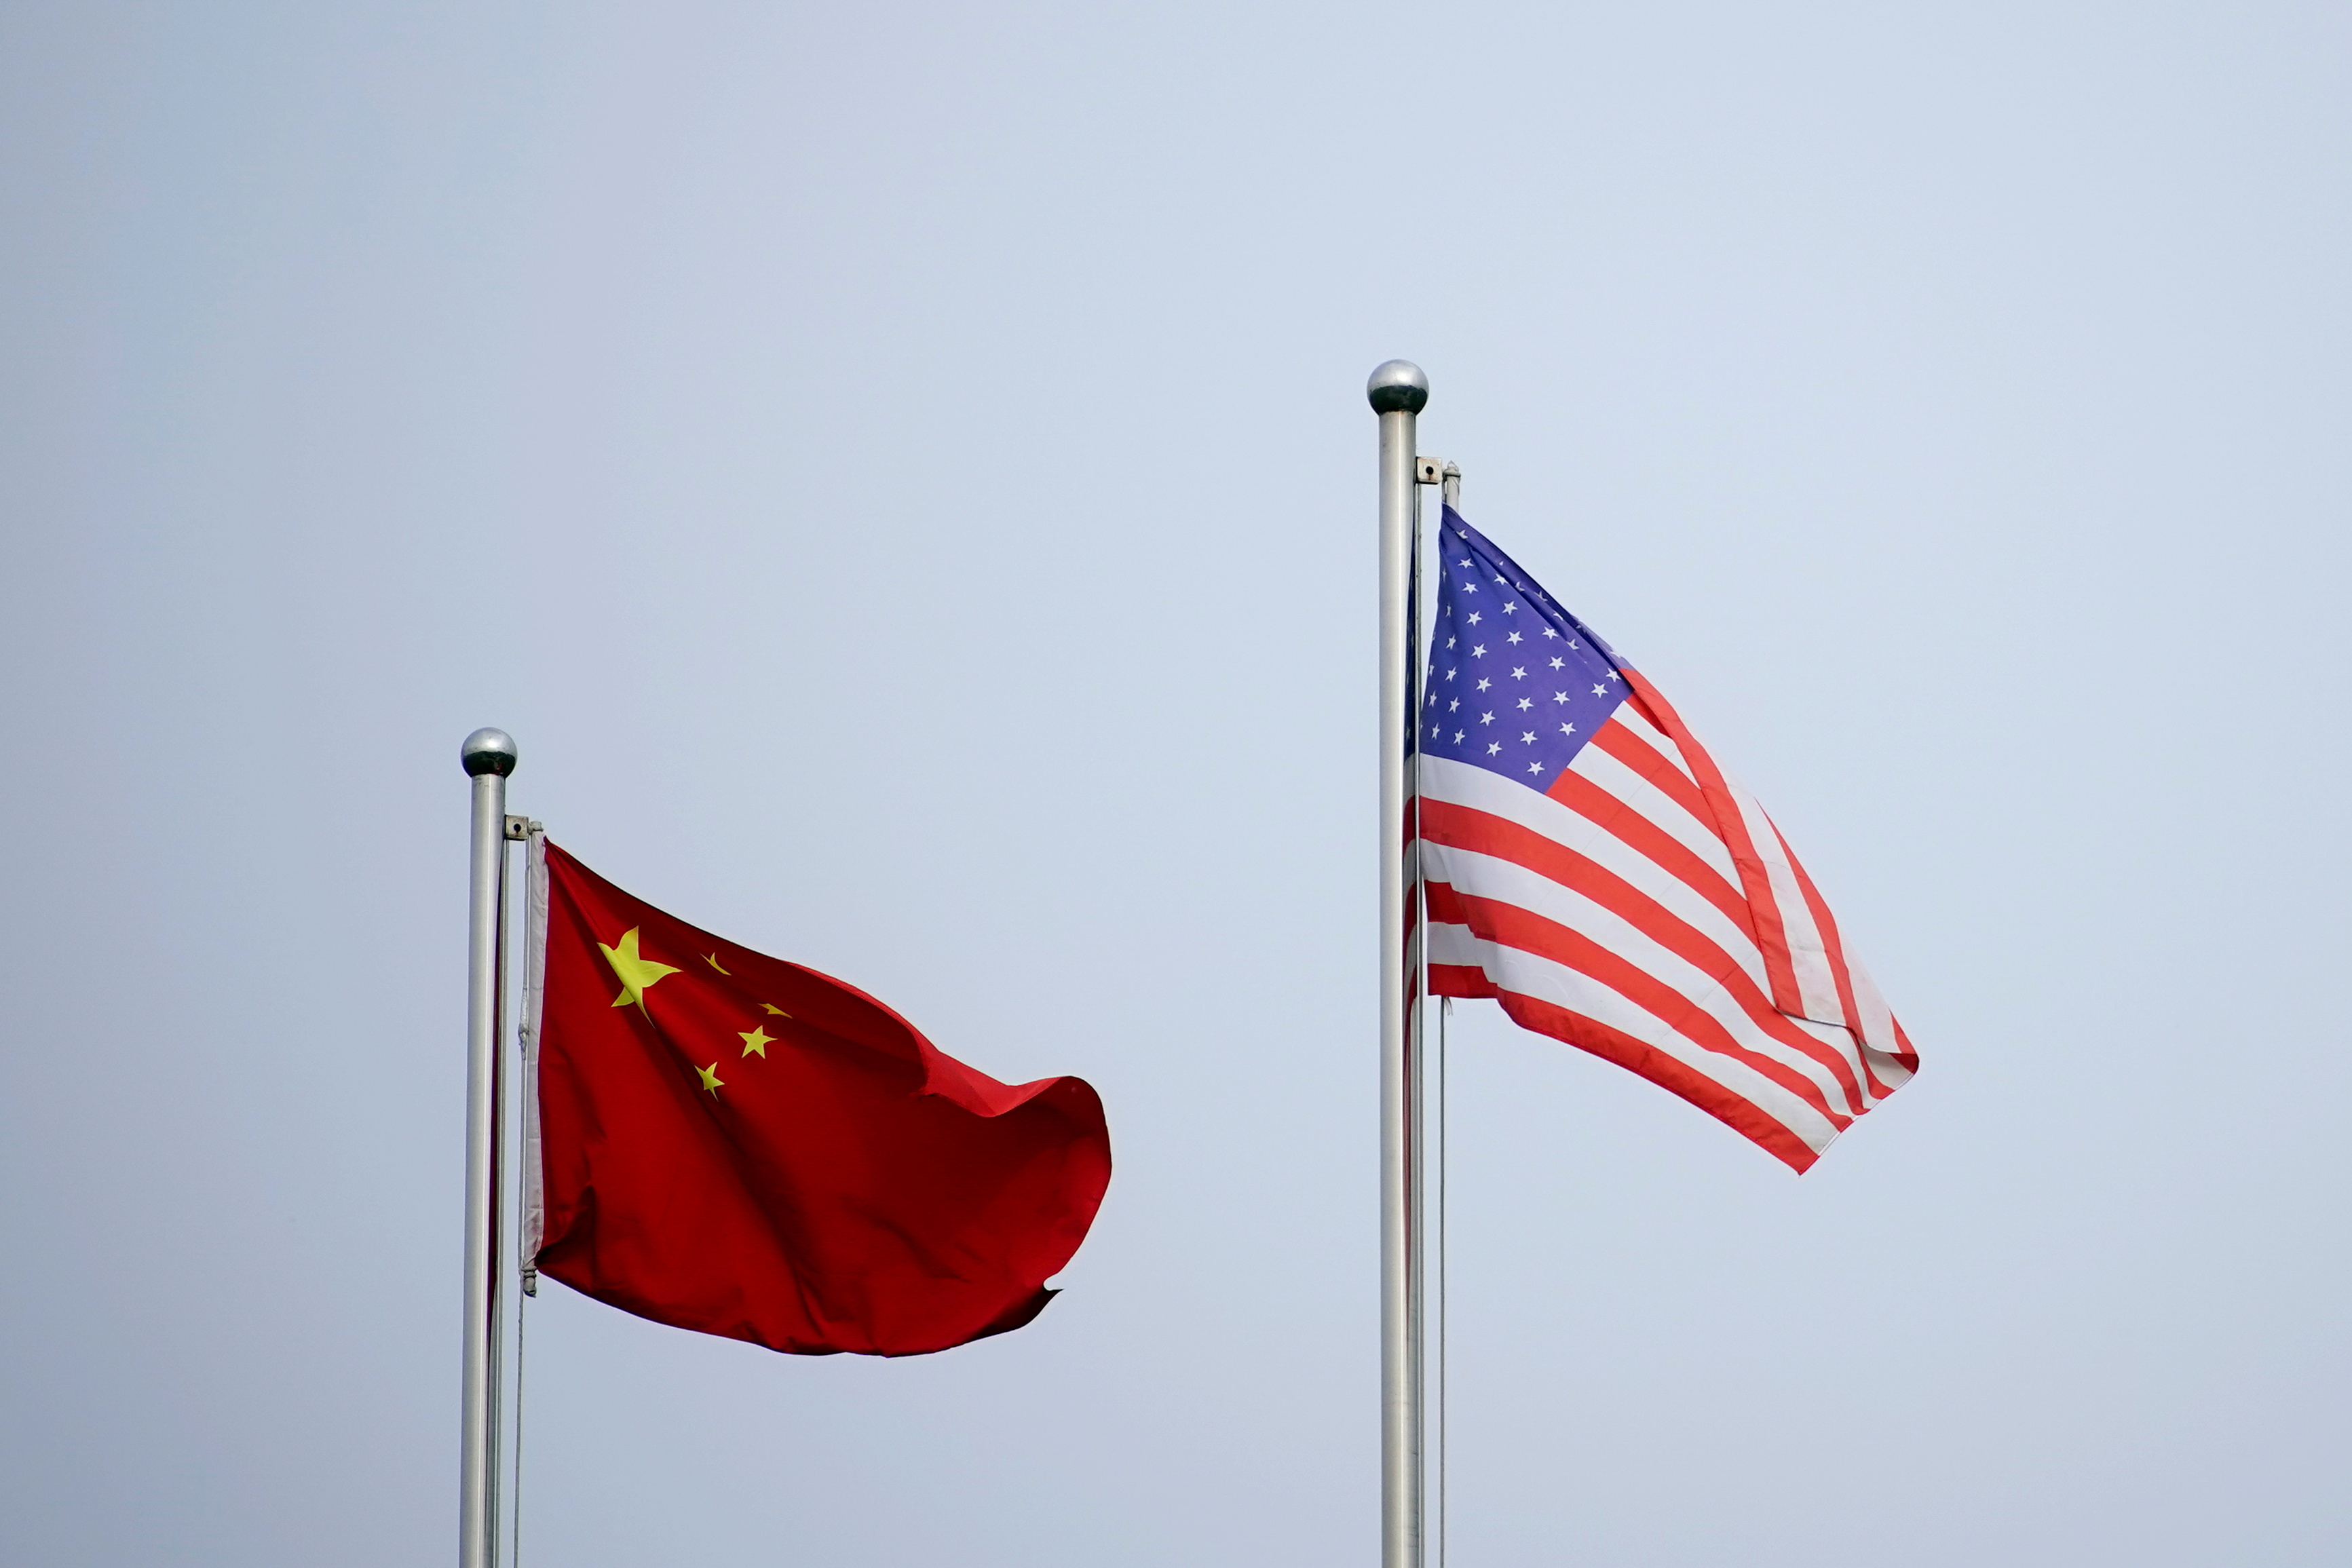 Chinese and U.S. flags flutter outside a company building in Shanghai, China April 14, 2021. REUTERS/Aly Song